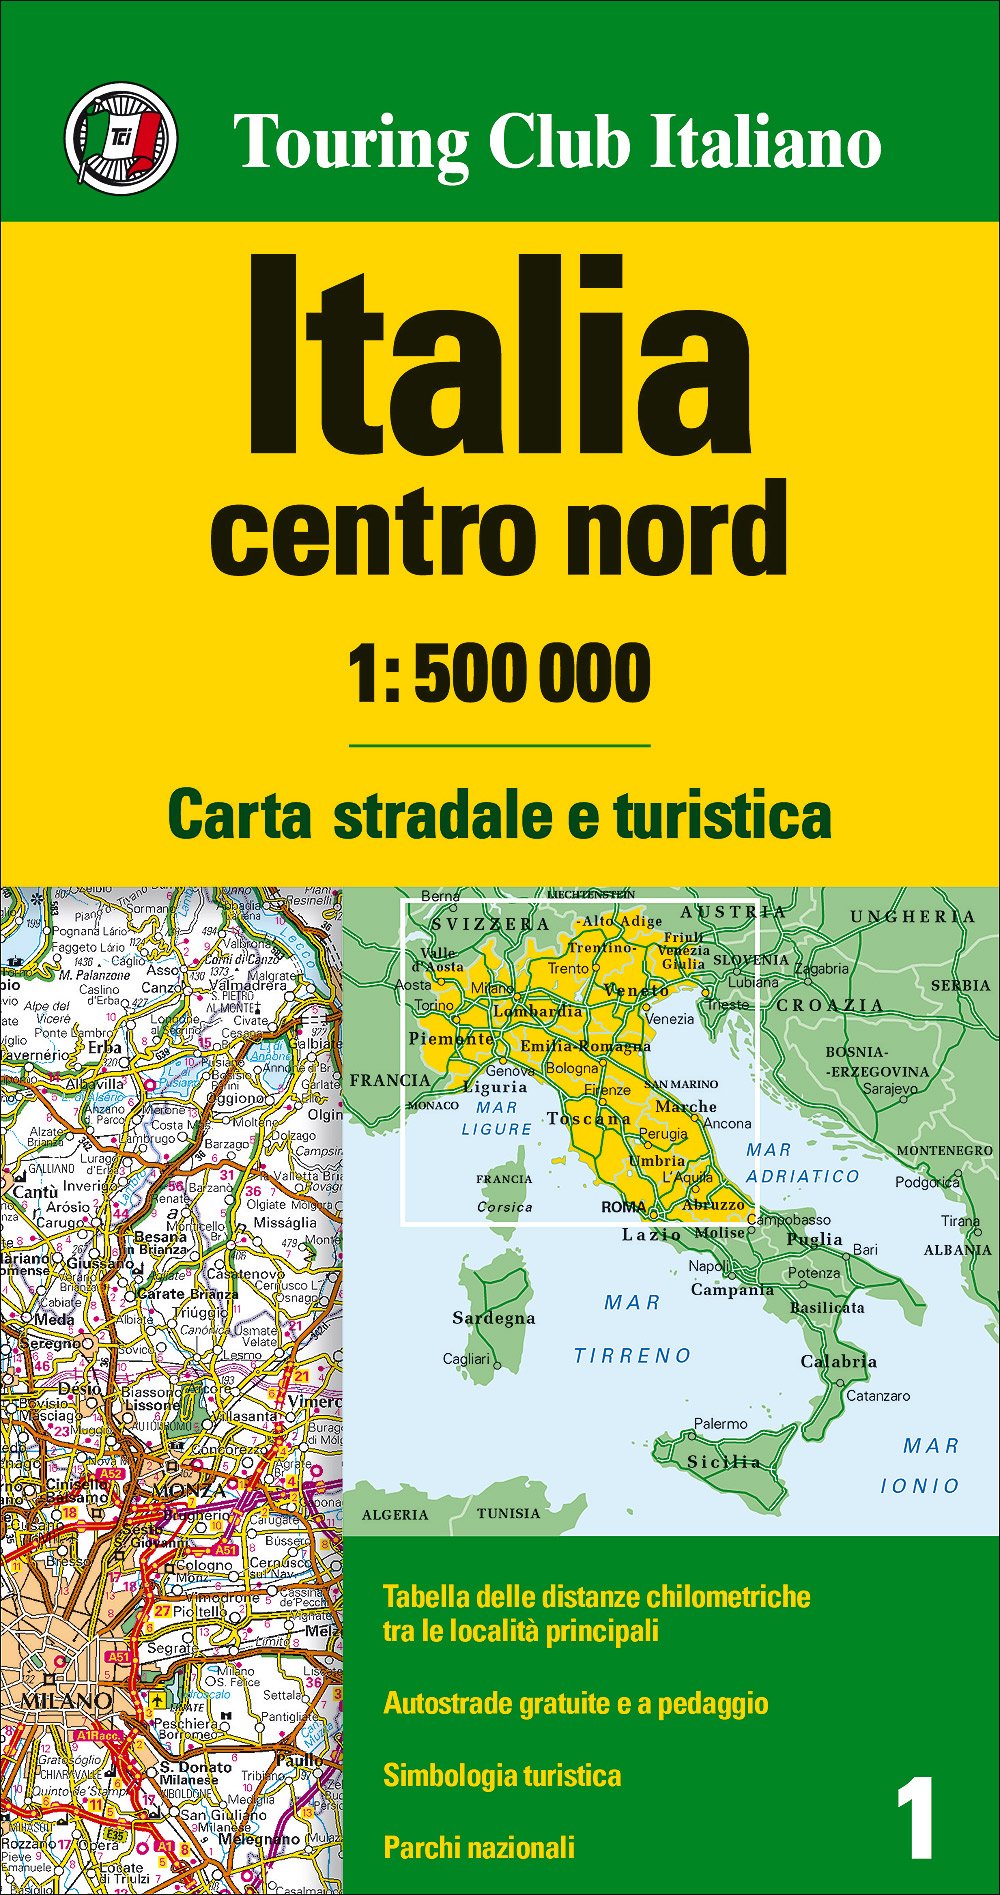 Northern and Central Italy - 1:500,000